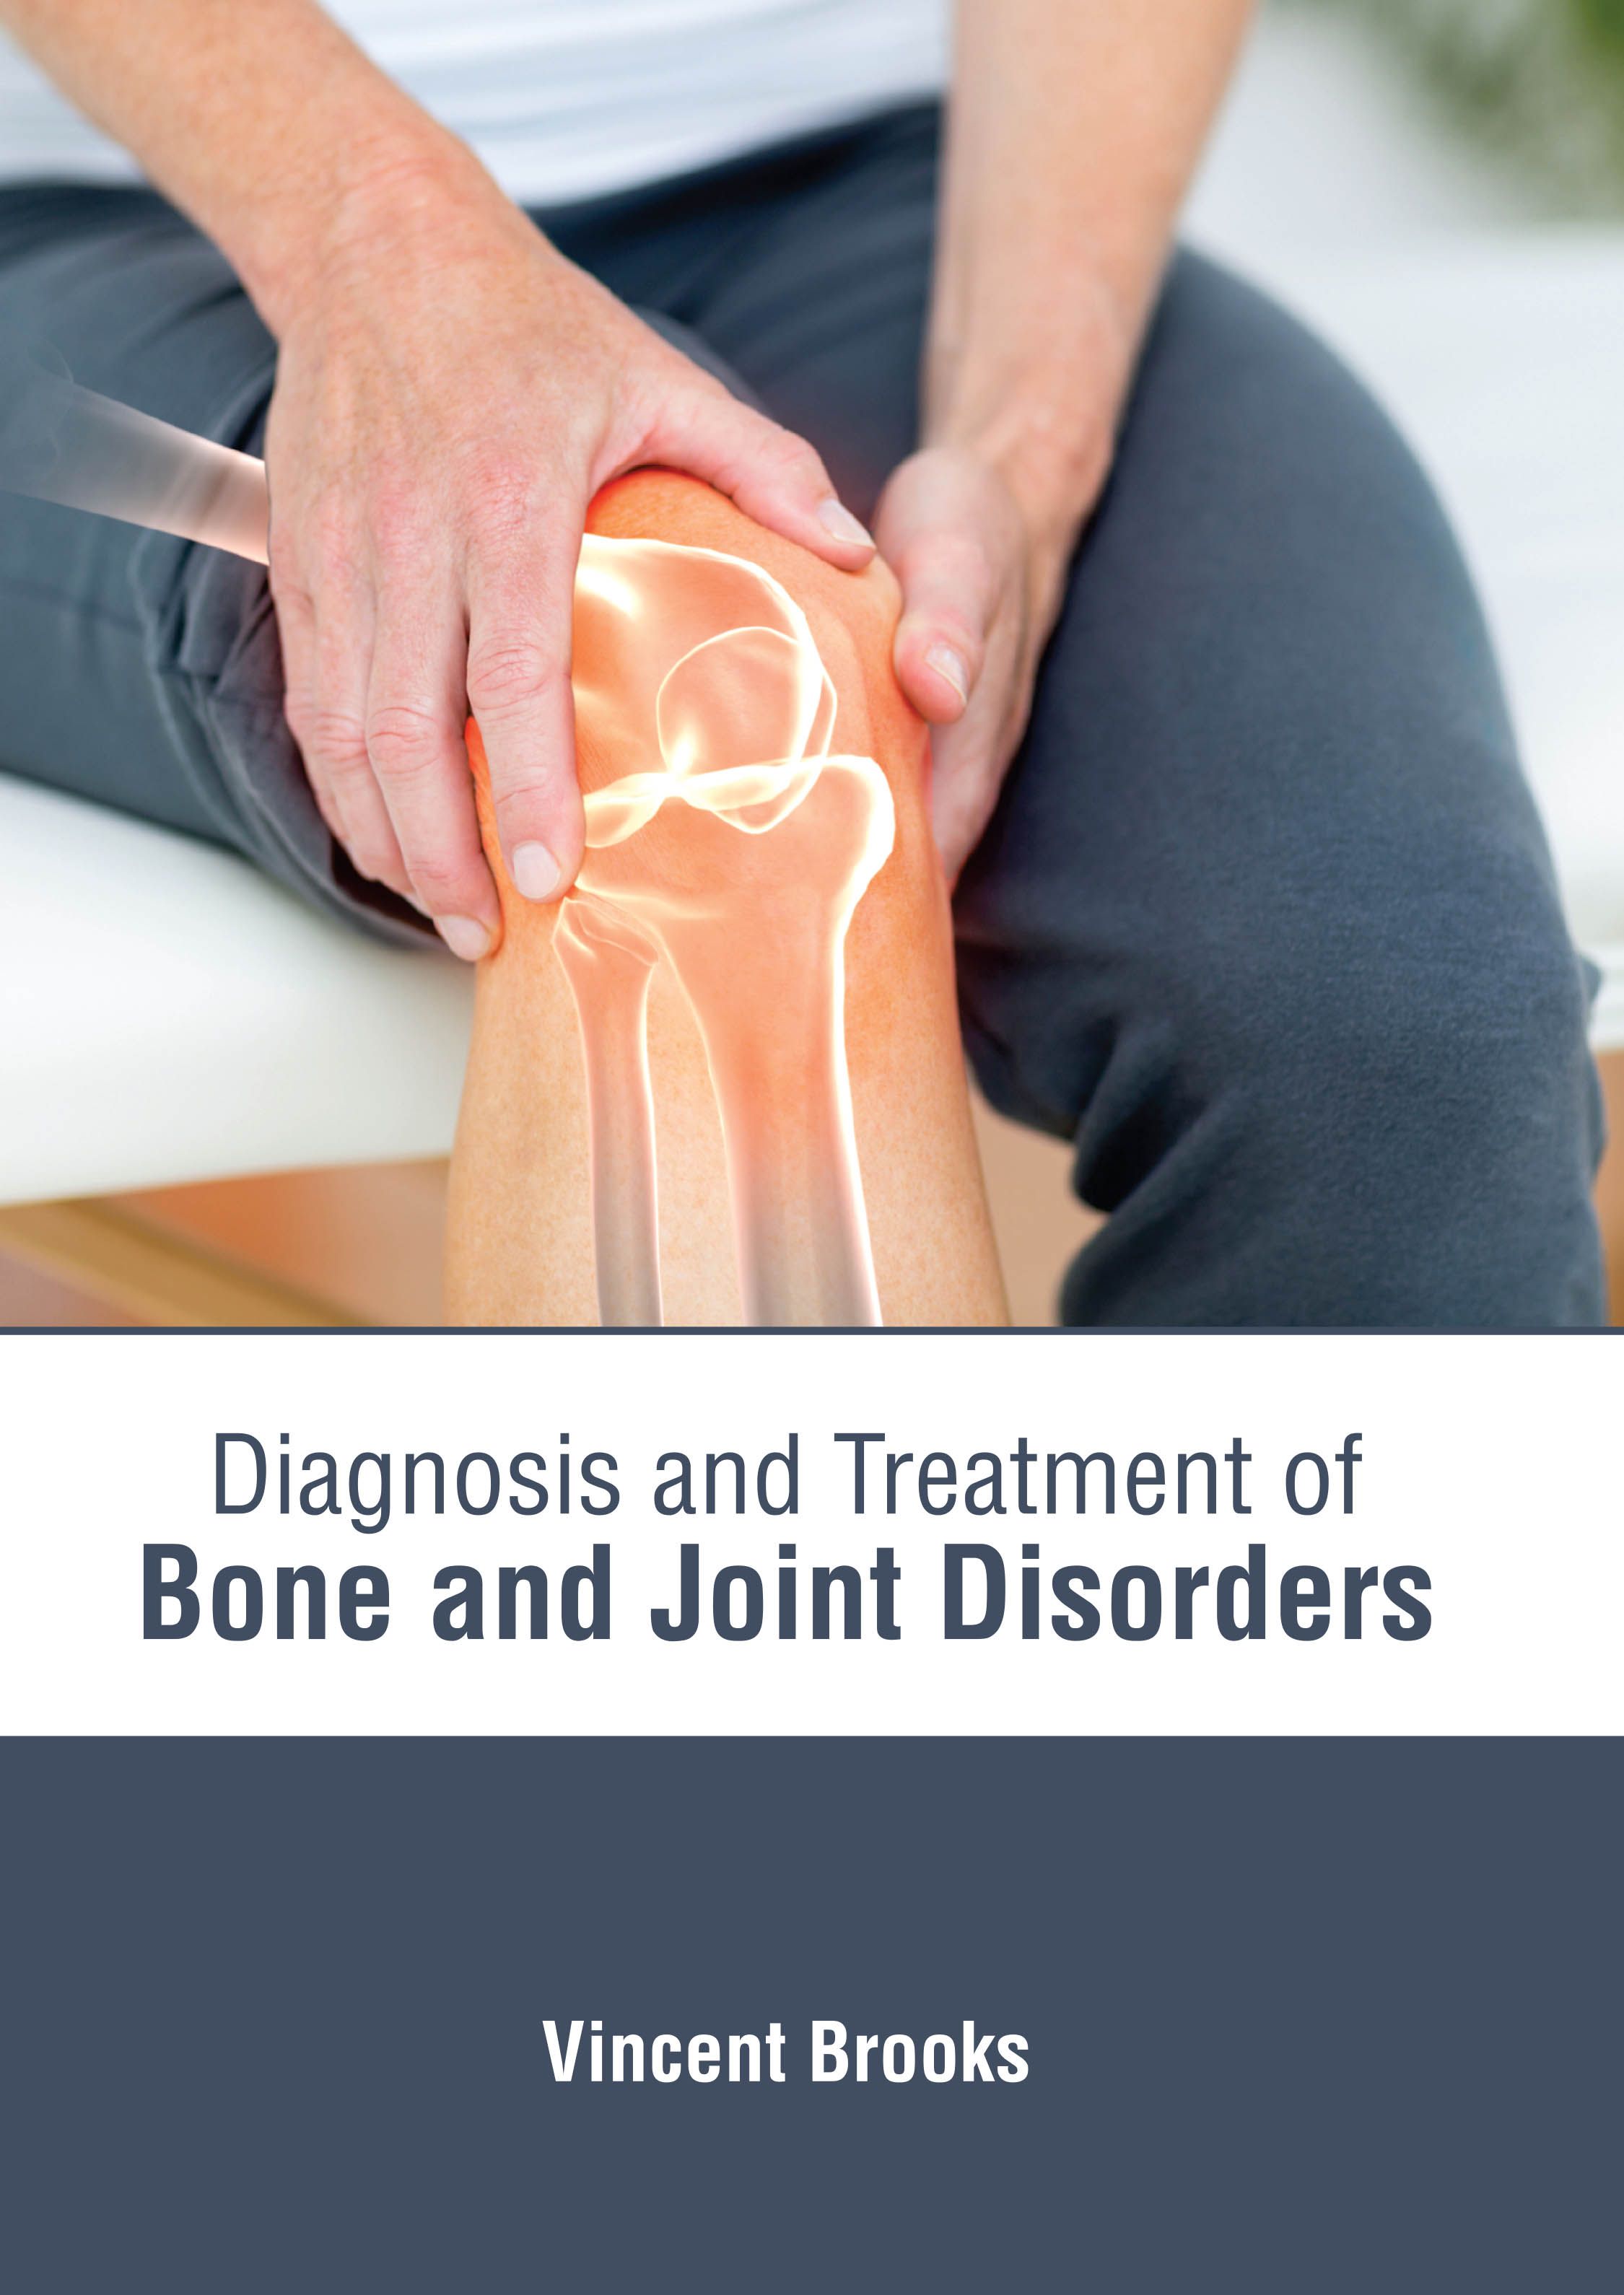 DIAGNOSIS AND TREATMENT OF BONE AND JOINT DISORDERS | ISBN: 9781639273935